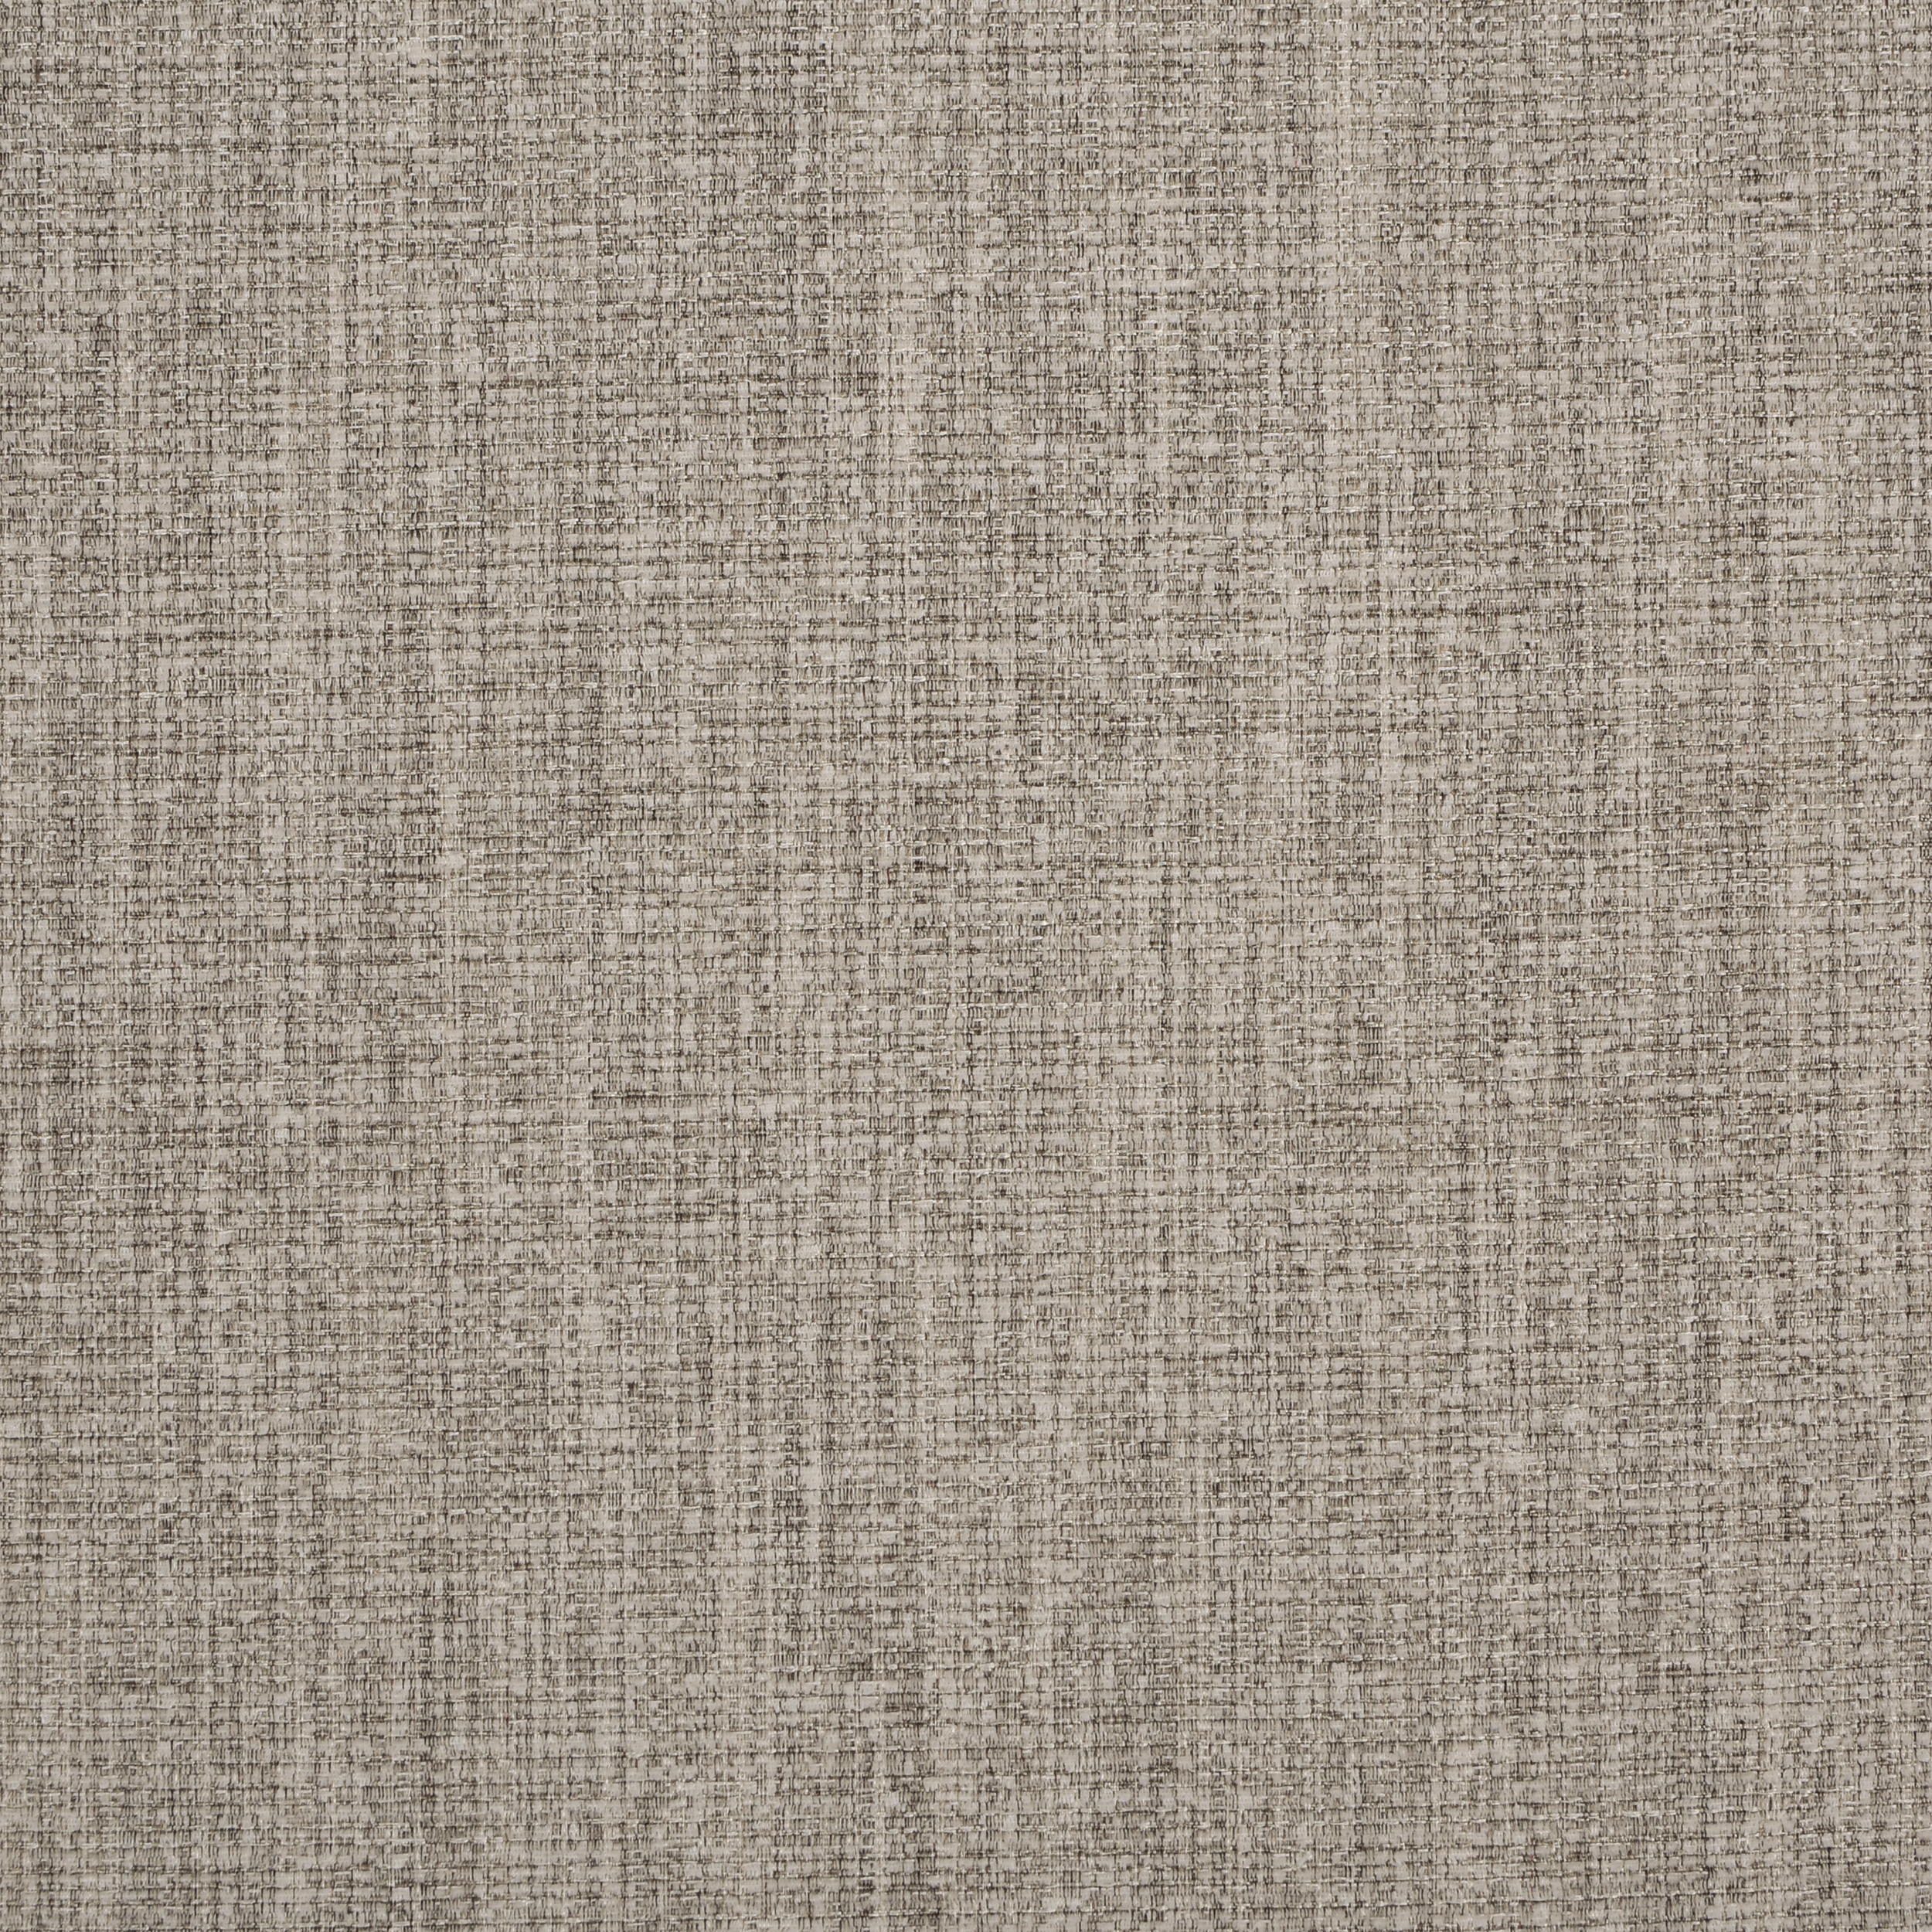 OATMEAL light gray solid color Wrapping Paper by NOW COLOR